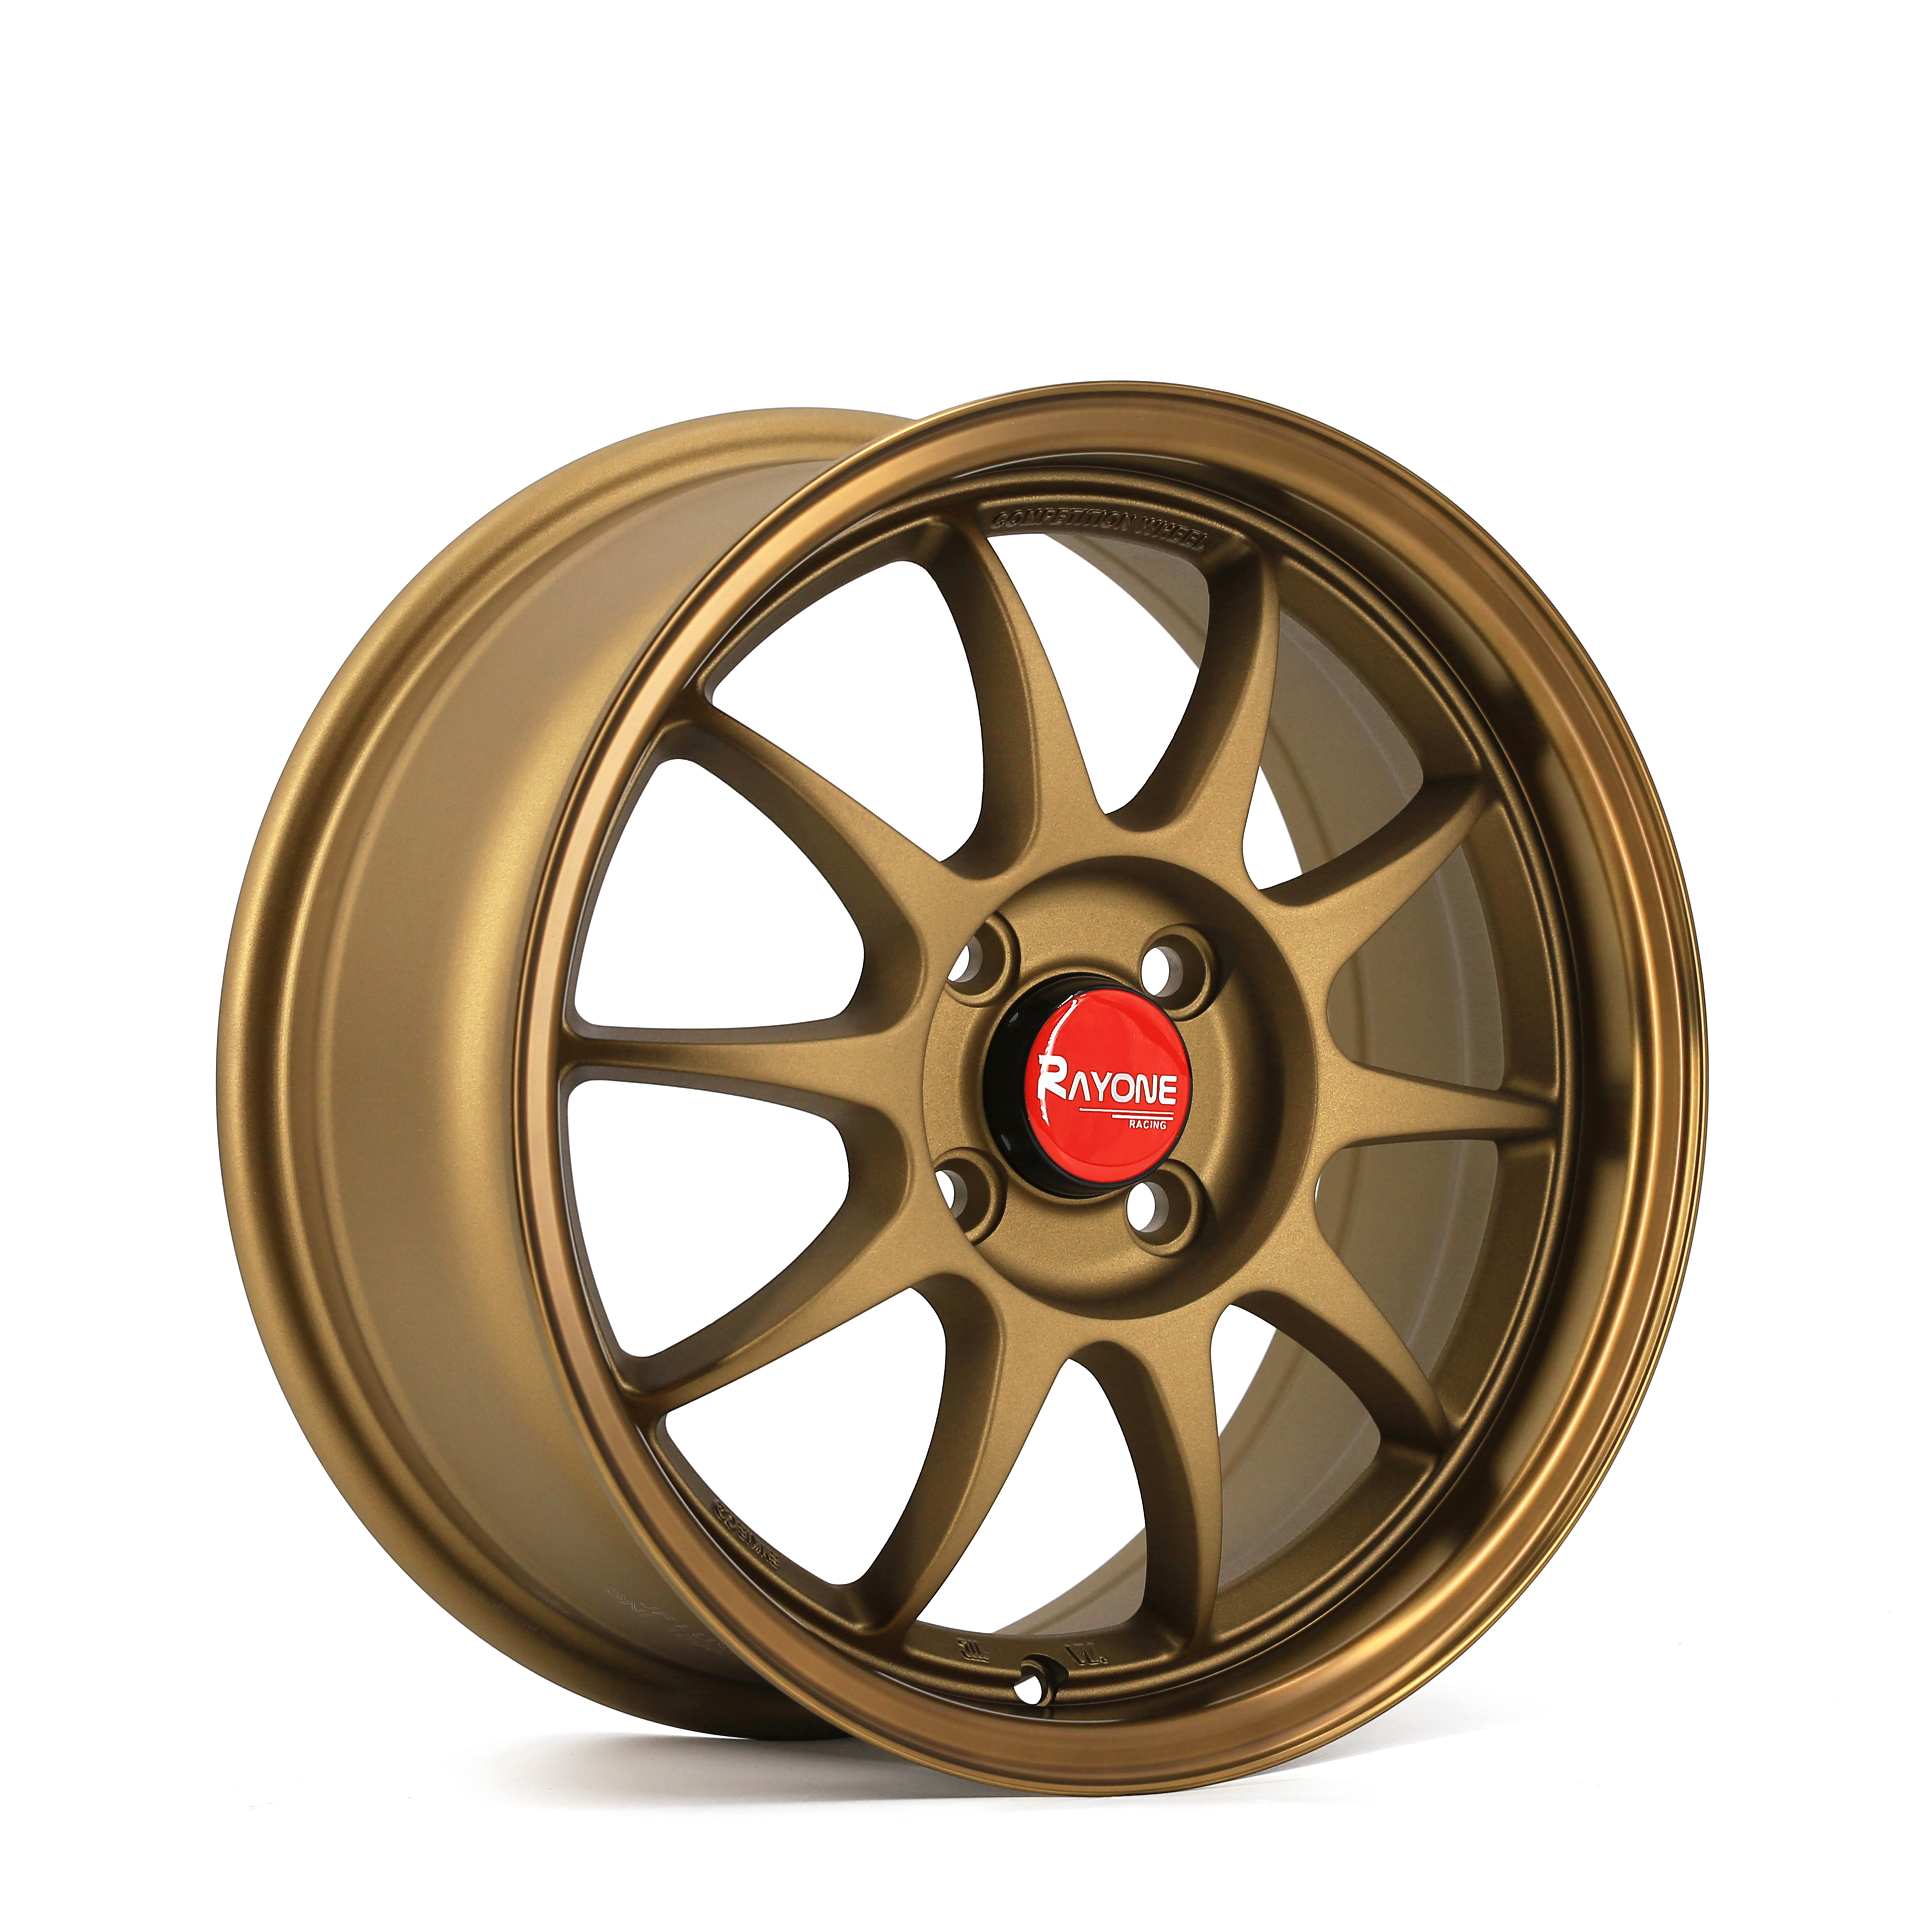 Rayone 681 Classical 10-Spoke Design 15inch Bronze Finish Car Alloy Wheels Featured Image